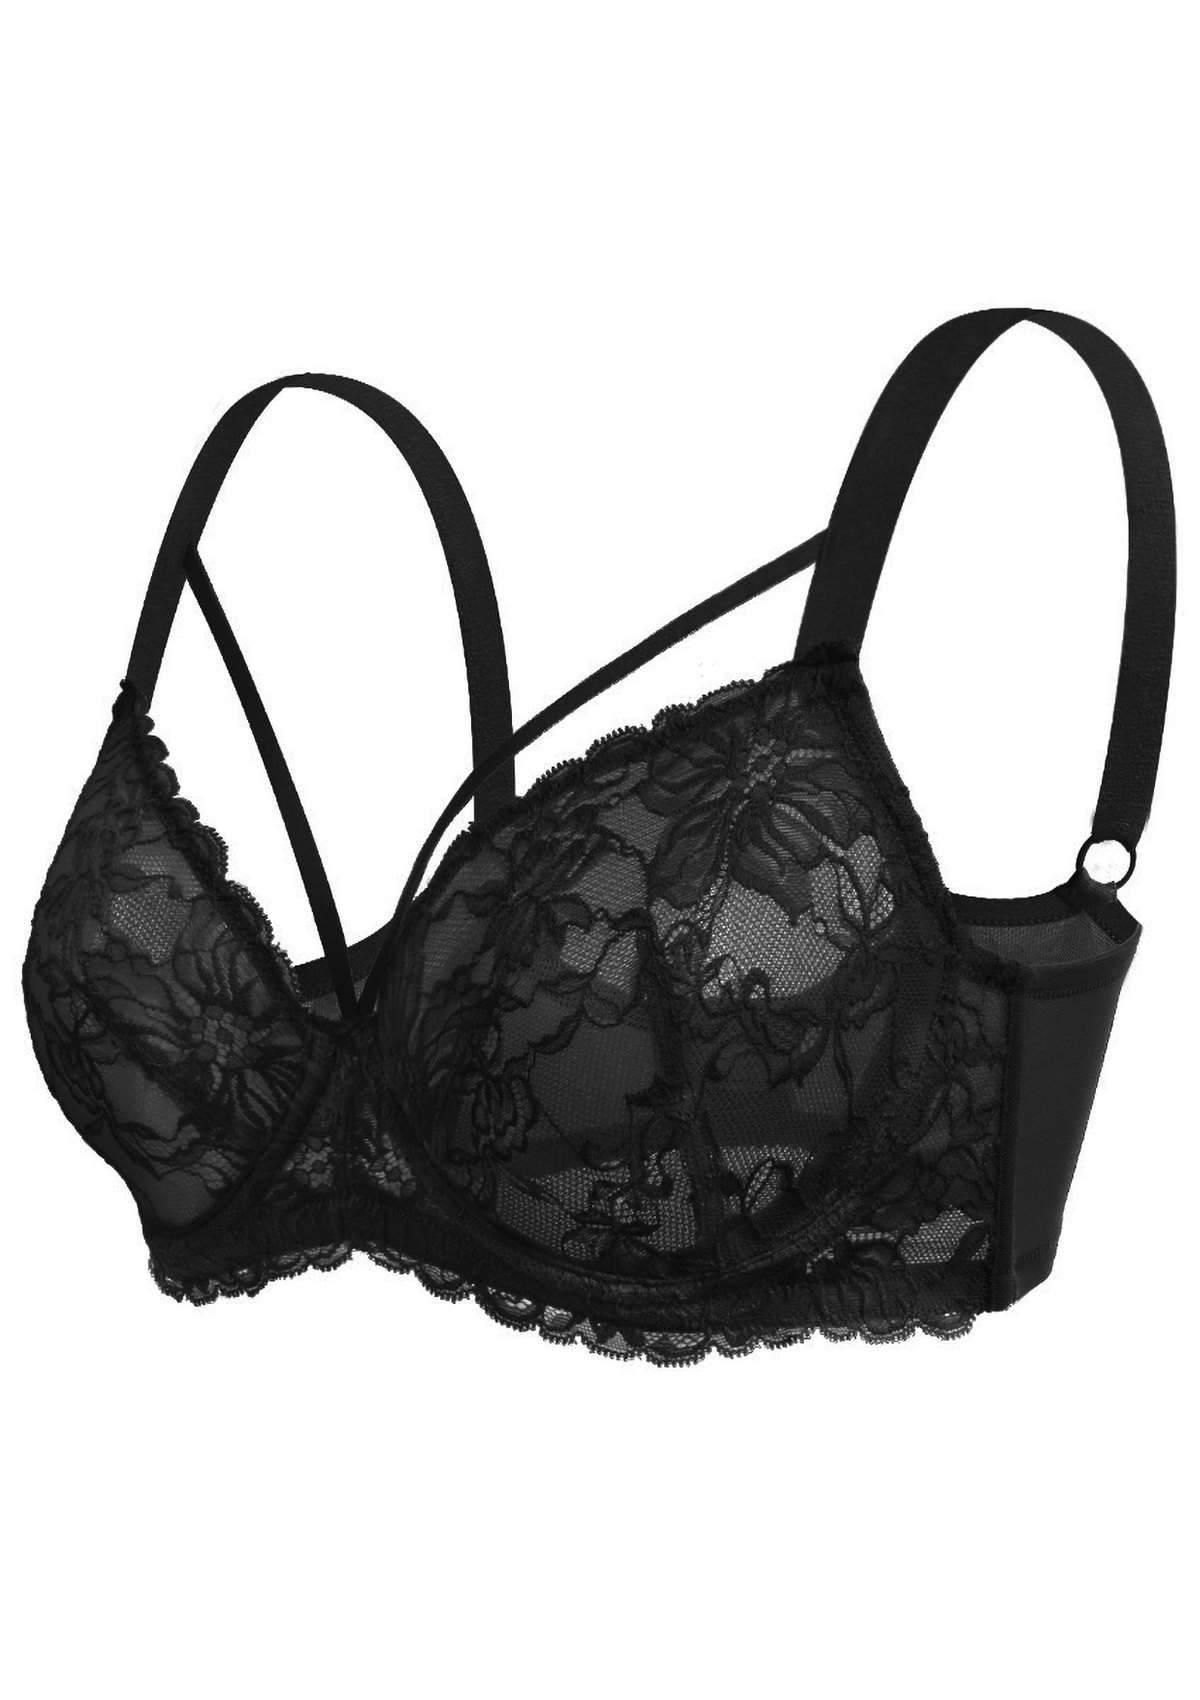 HSIA Pretty In Petals Bra - Plus Size Lingerie For Comfrot And Support - Black / 46 / H